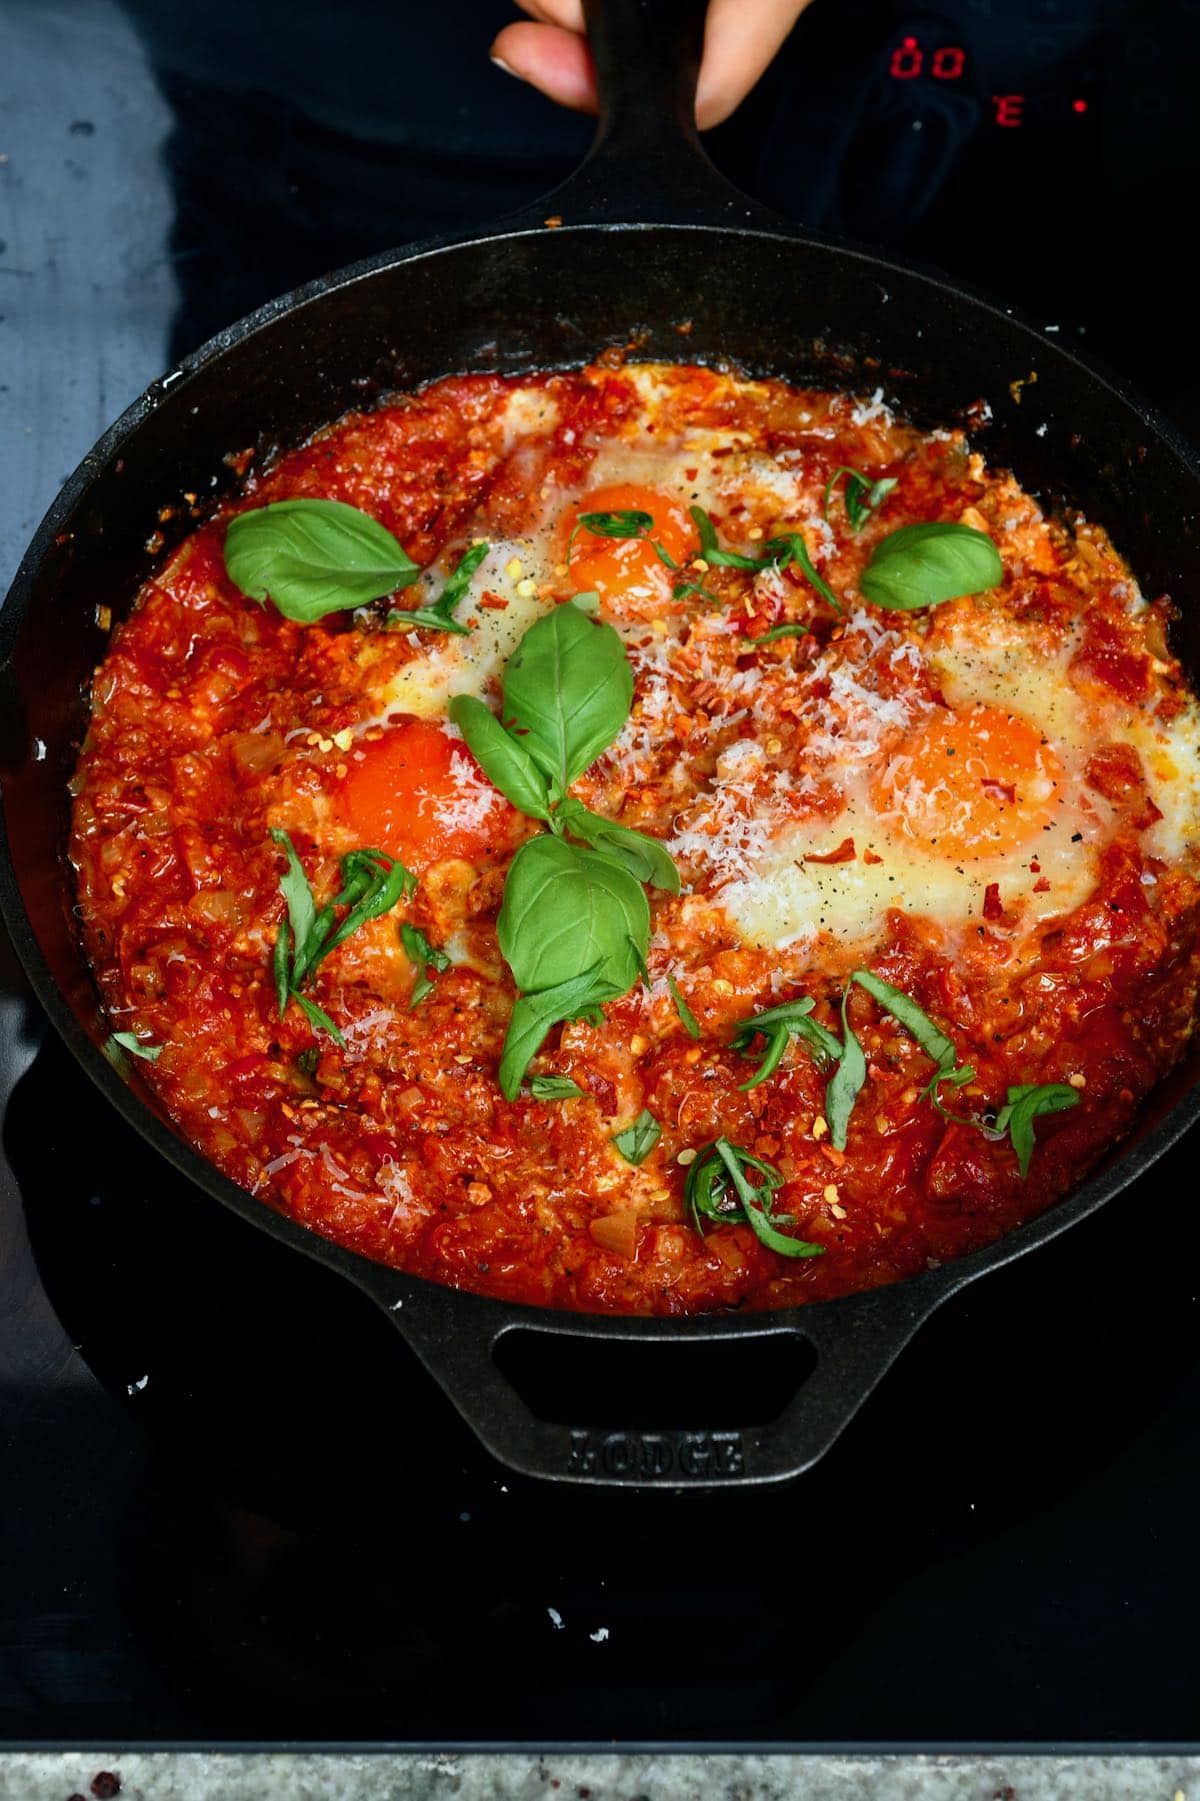 A skillet with eggs in purgatory